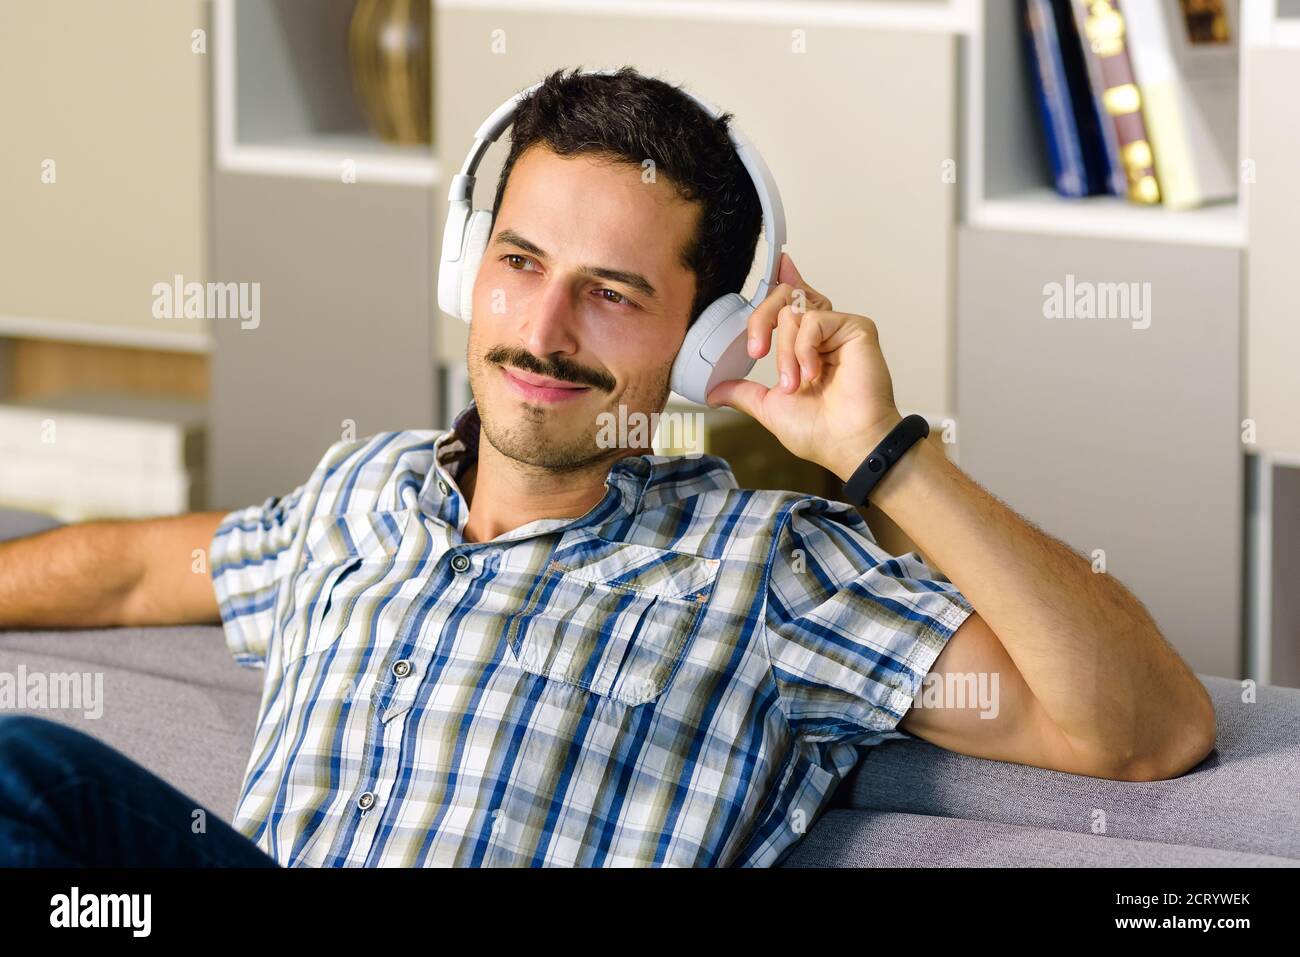 Man relaxing listening to music on stereo headphones on a comfortable sofa at home smiling with pleasure in a concept of personal entertainment Stock Photo